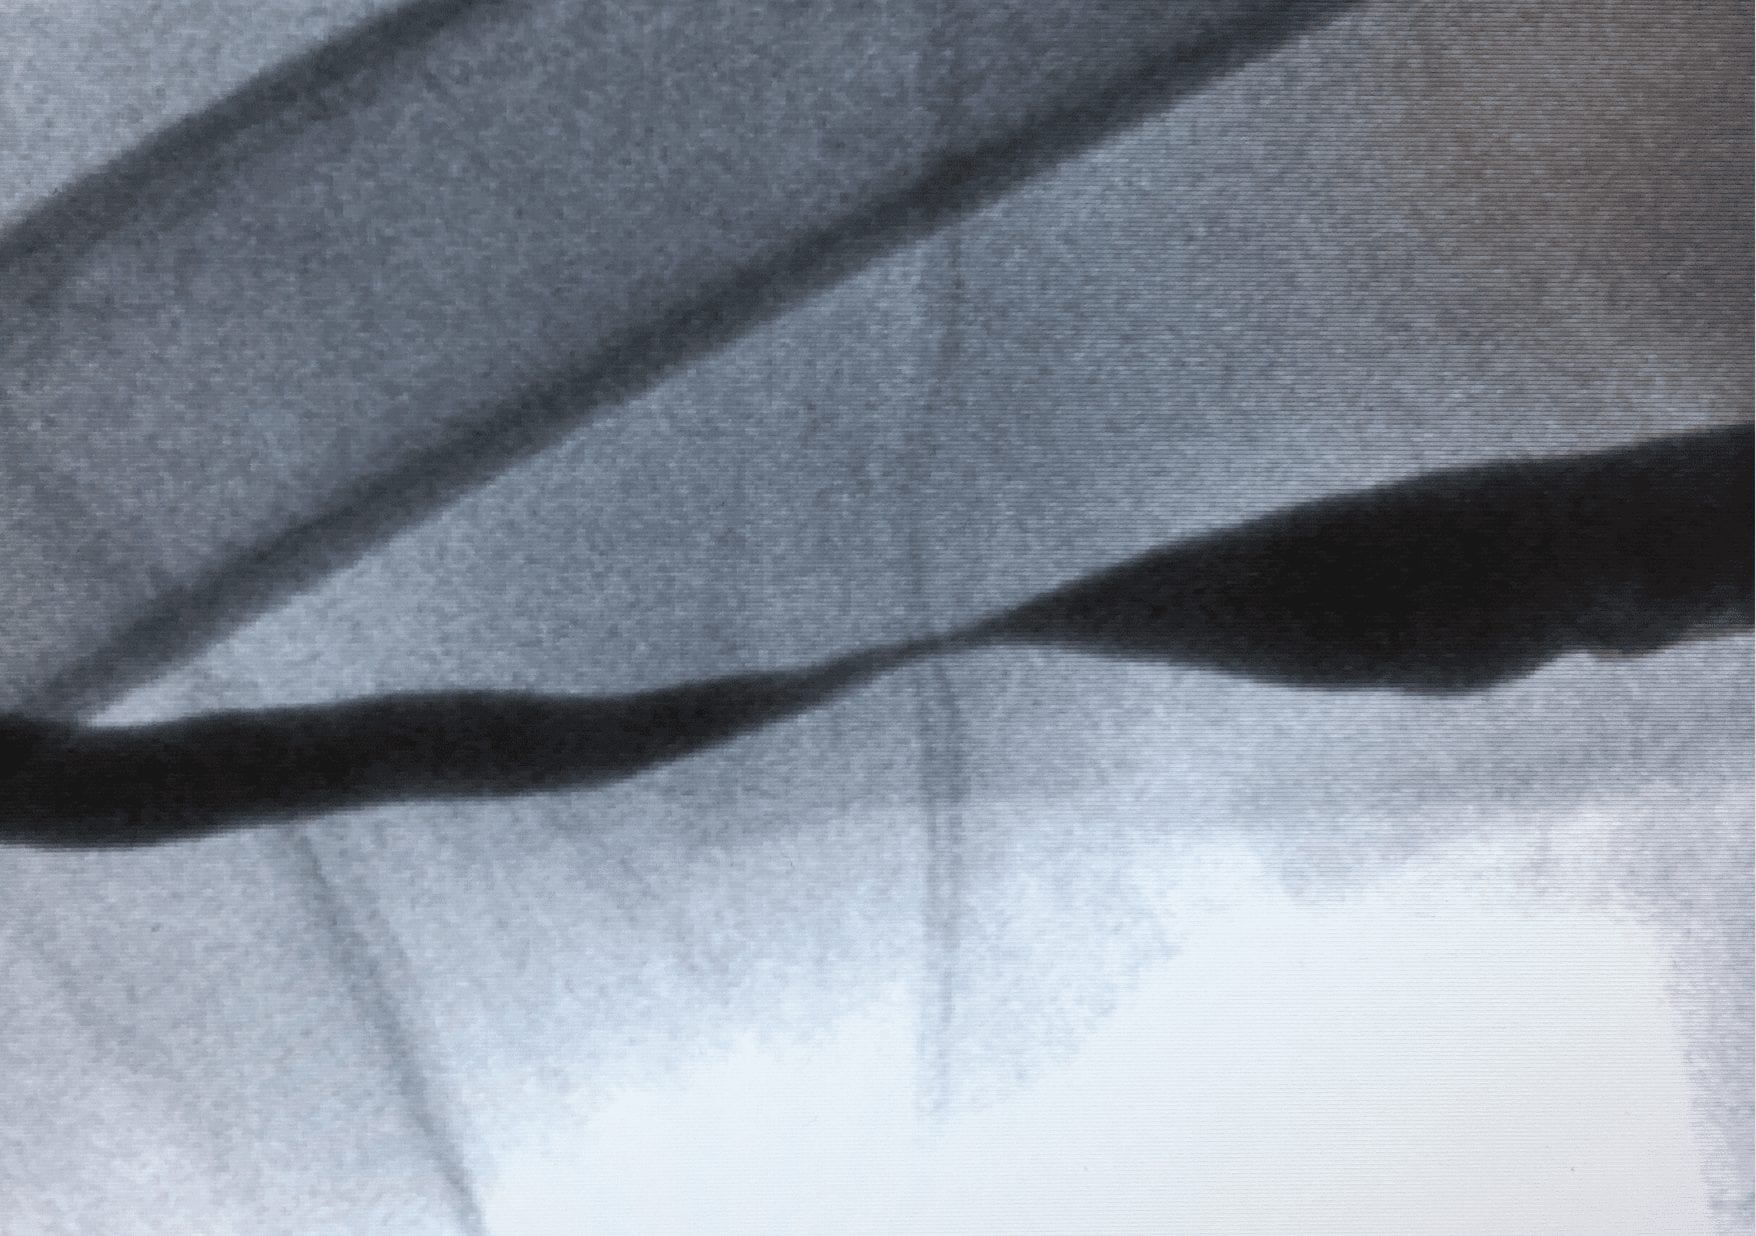 An angiogram of a patient with ESRD with a severely occluded arteriovenous fistula.